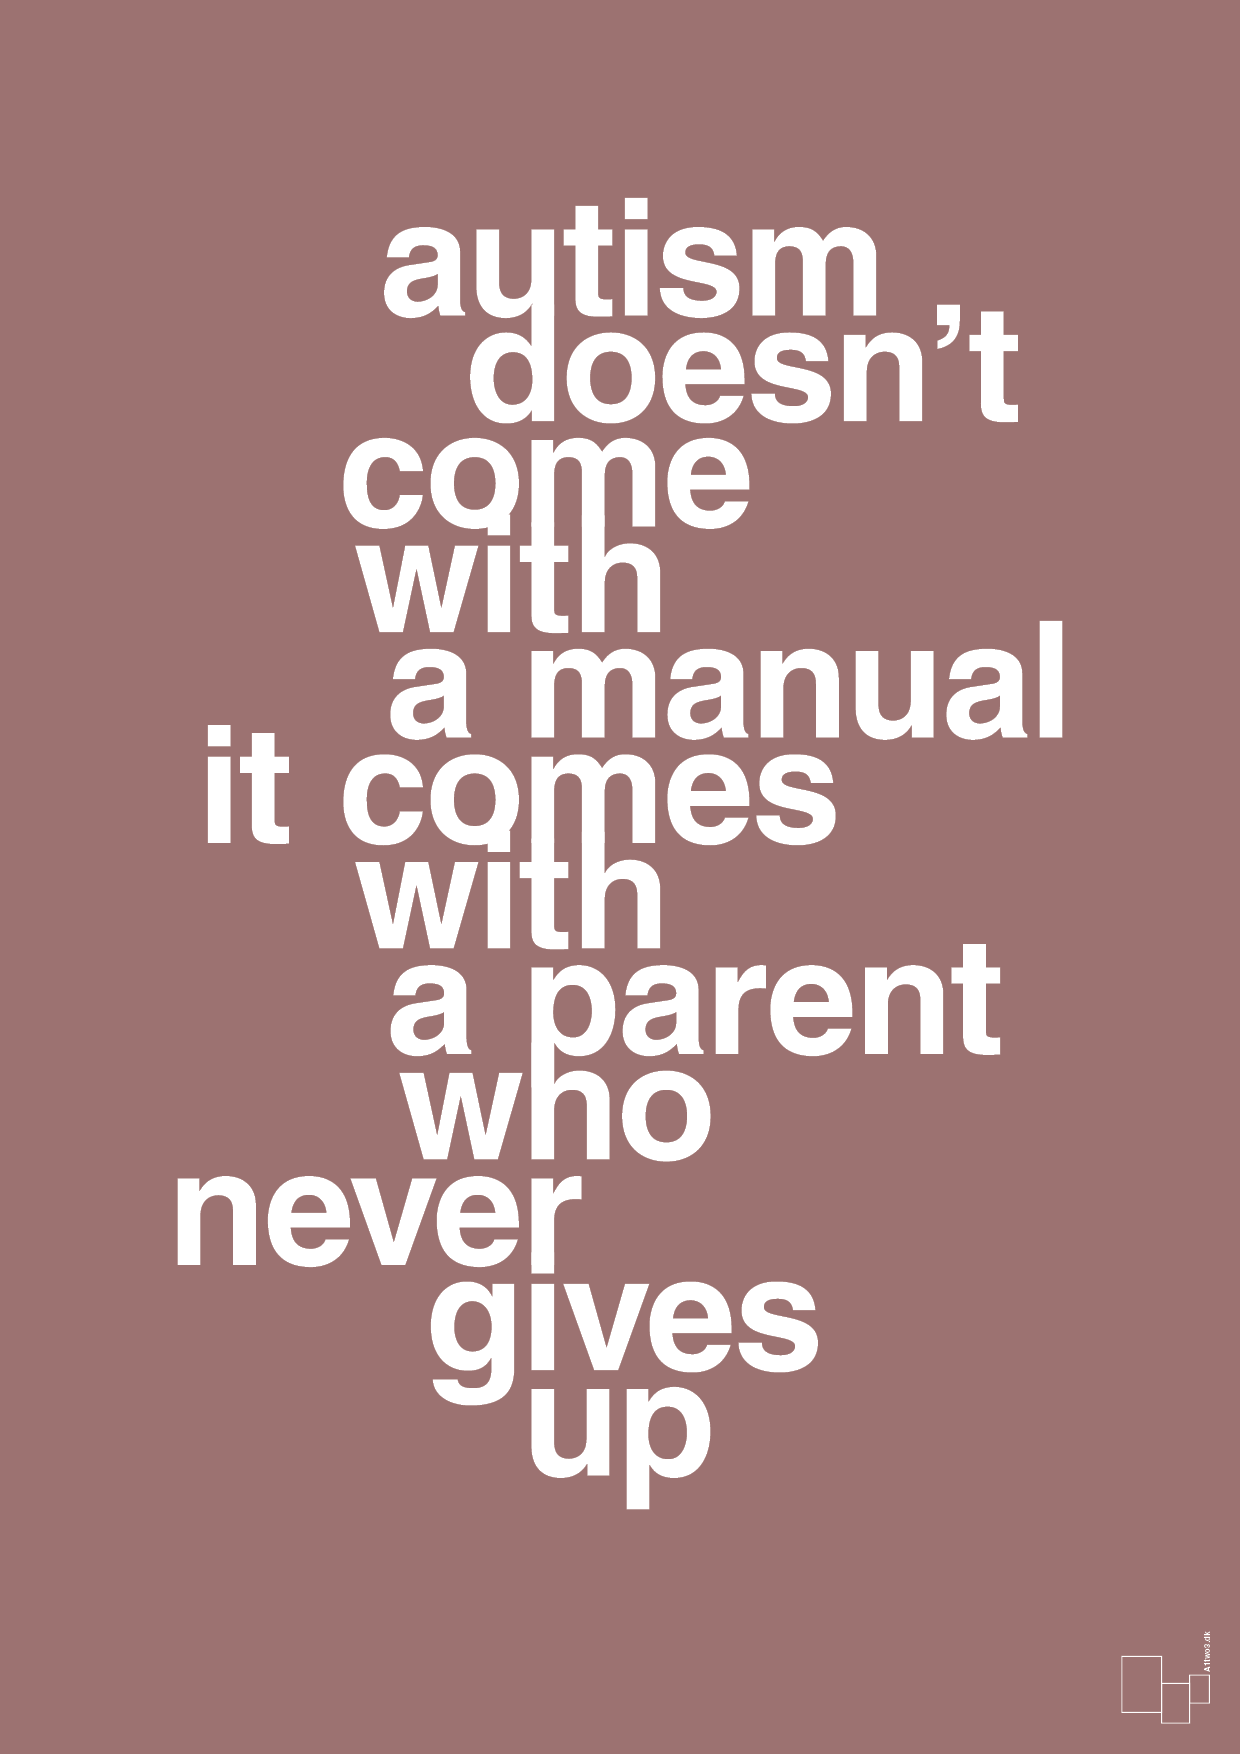 autism doesnt come with a manual it comes with a parent who never gives up - Plakat med Samfund i Plum